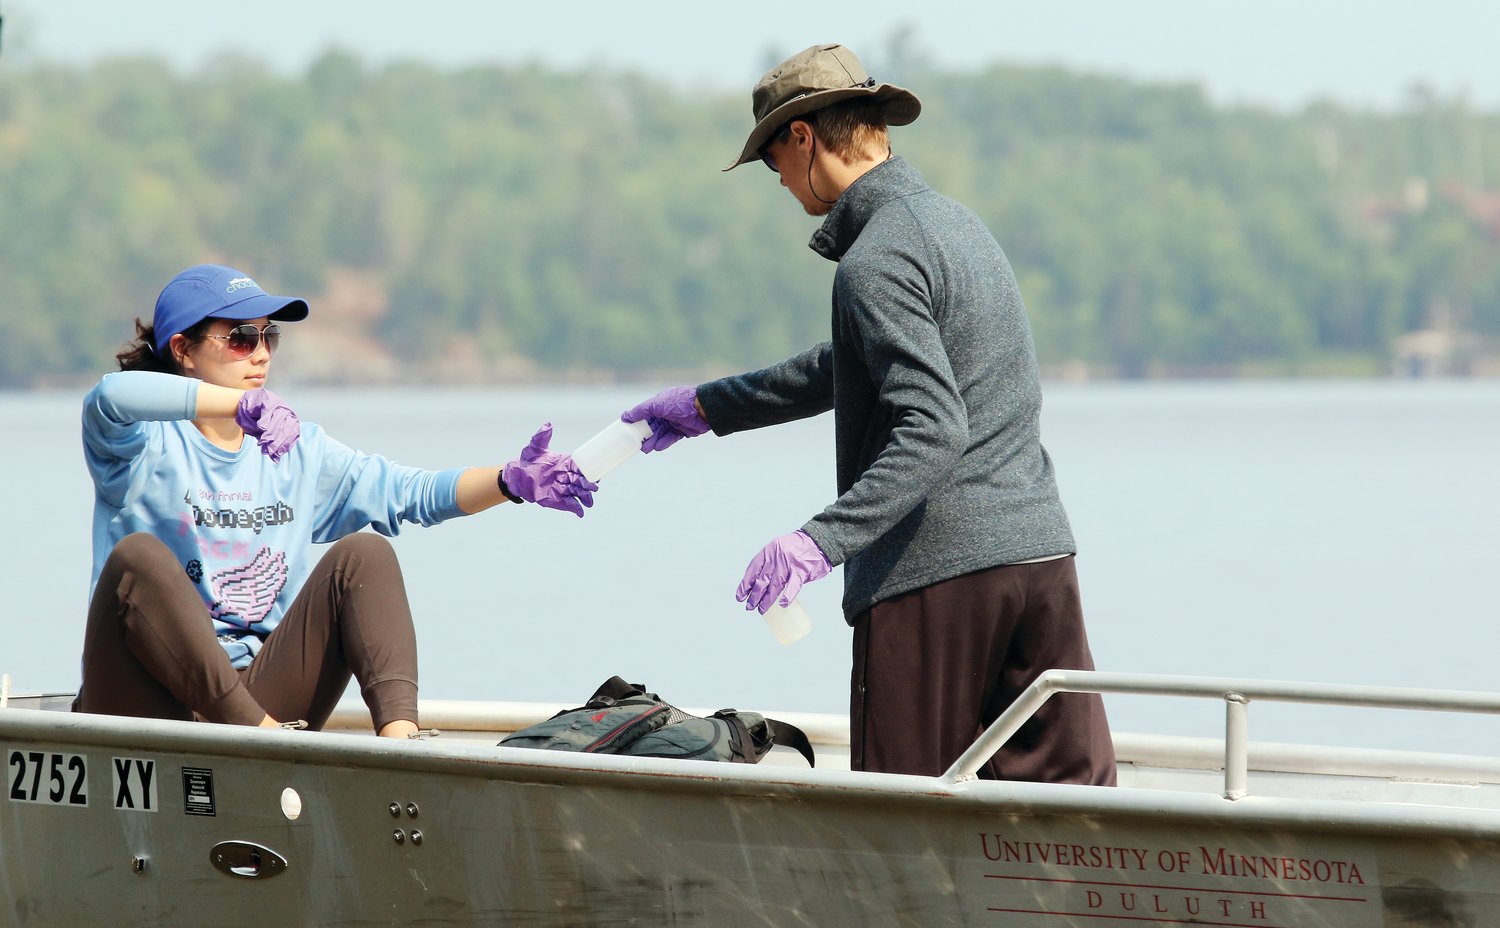 NRRI grad student Anna Totsch takes a bottle from research assistant Collin Krochalk, a UMD undergrad who is working for the NRRI this summer. 
They were gathering water samples on Frazer Bay on Monday.